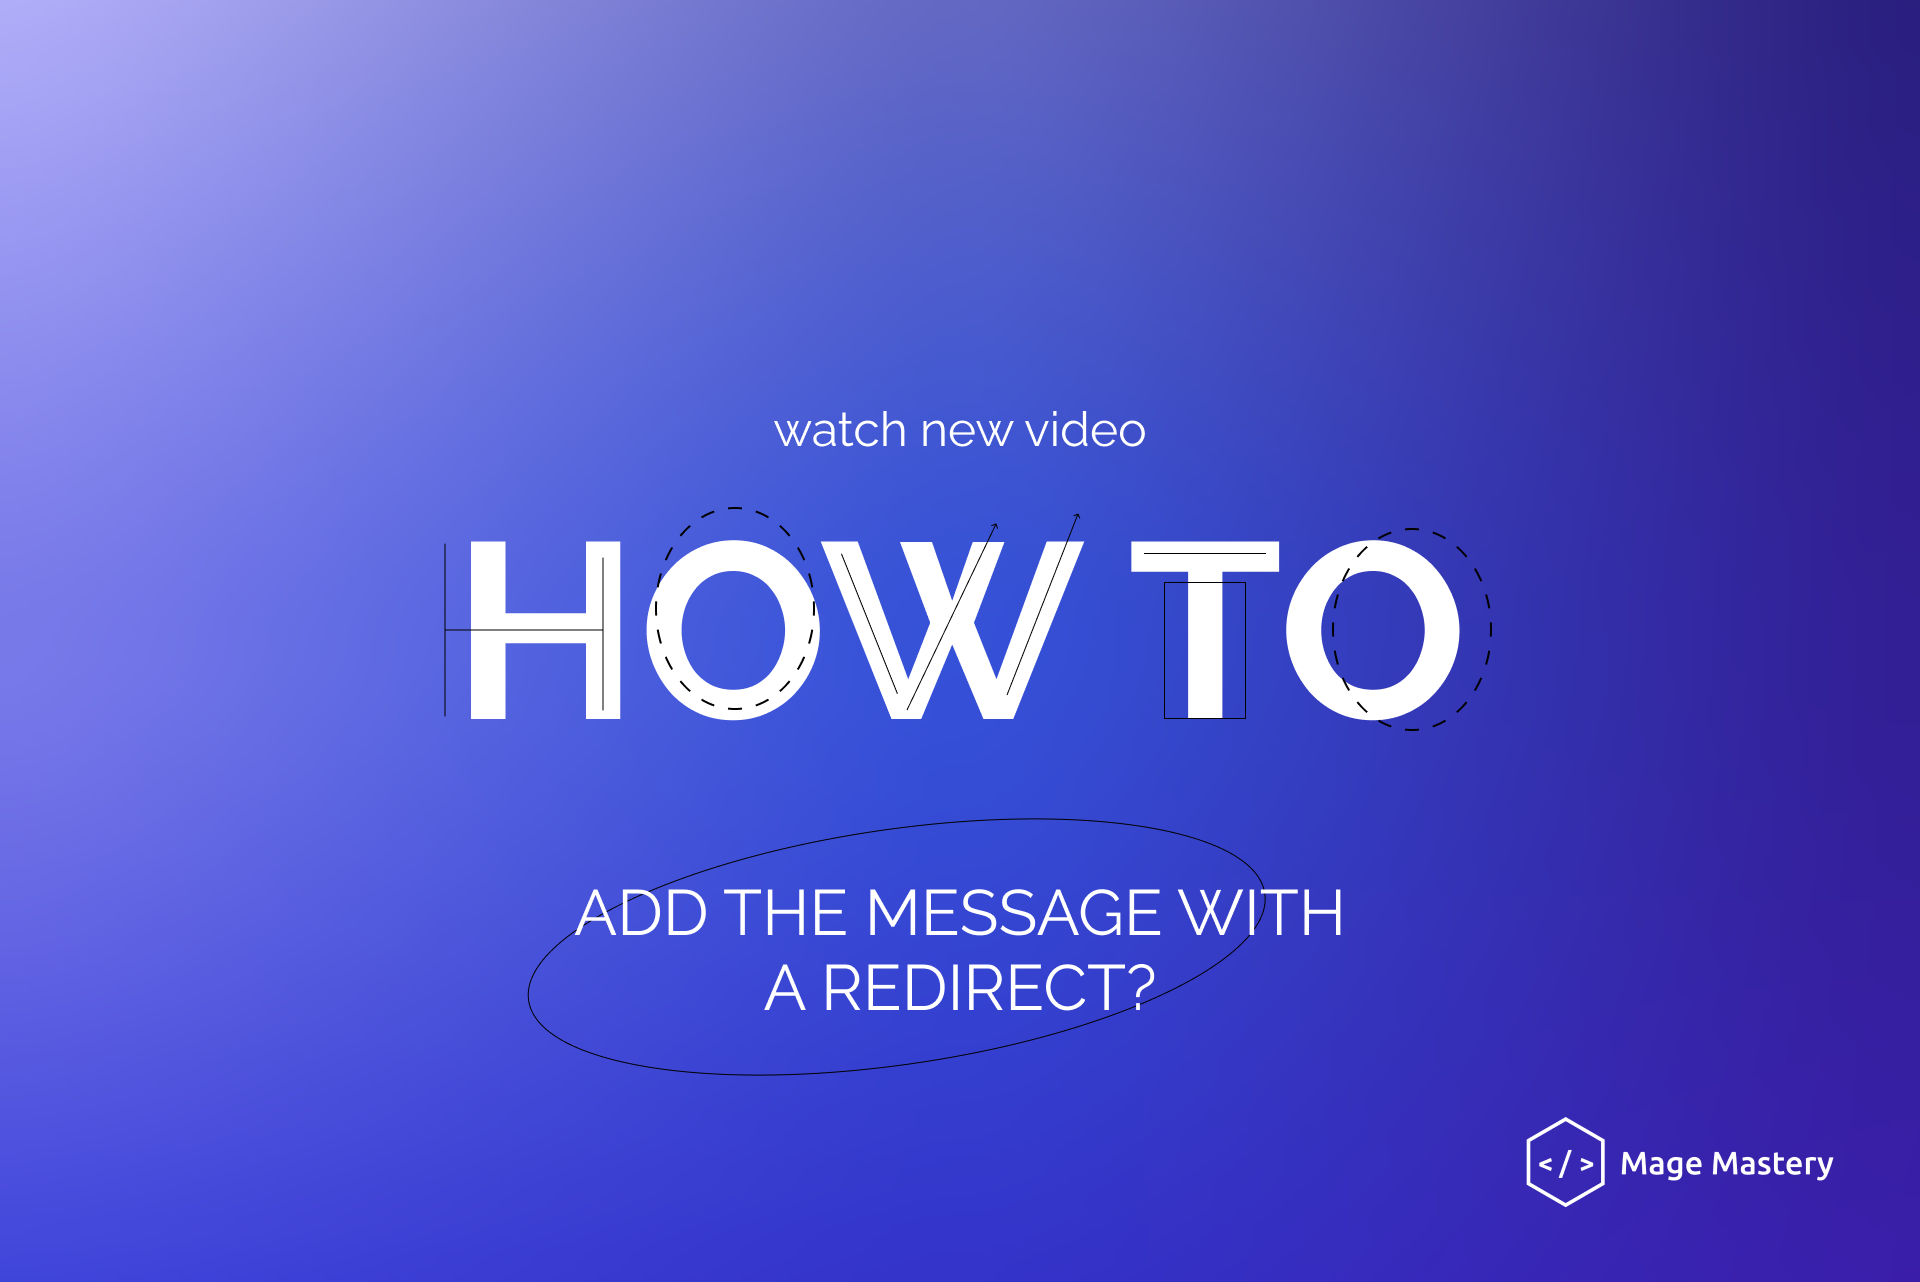 How to add the message with a redirect?